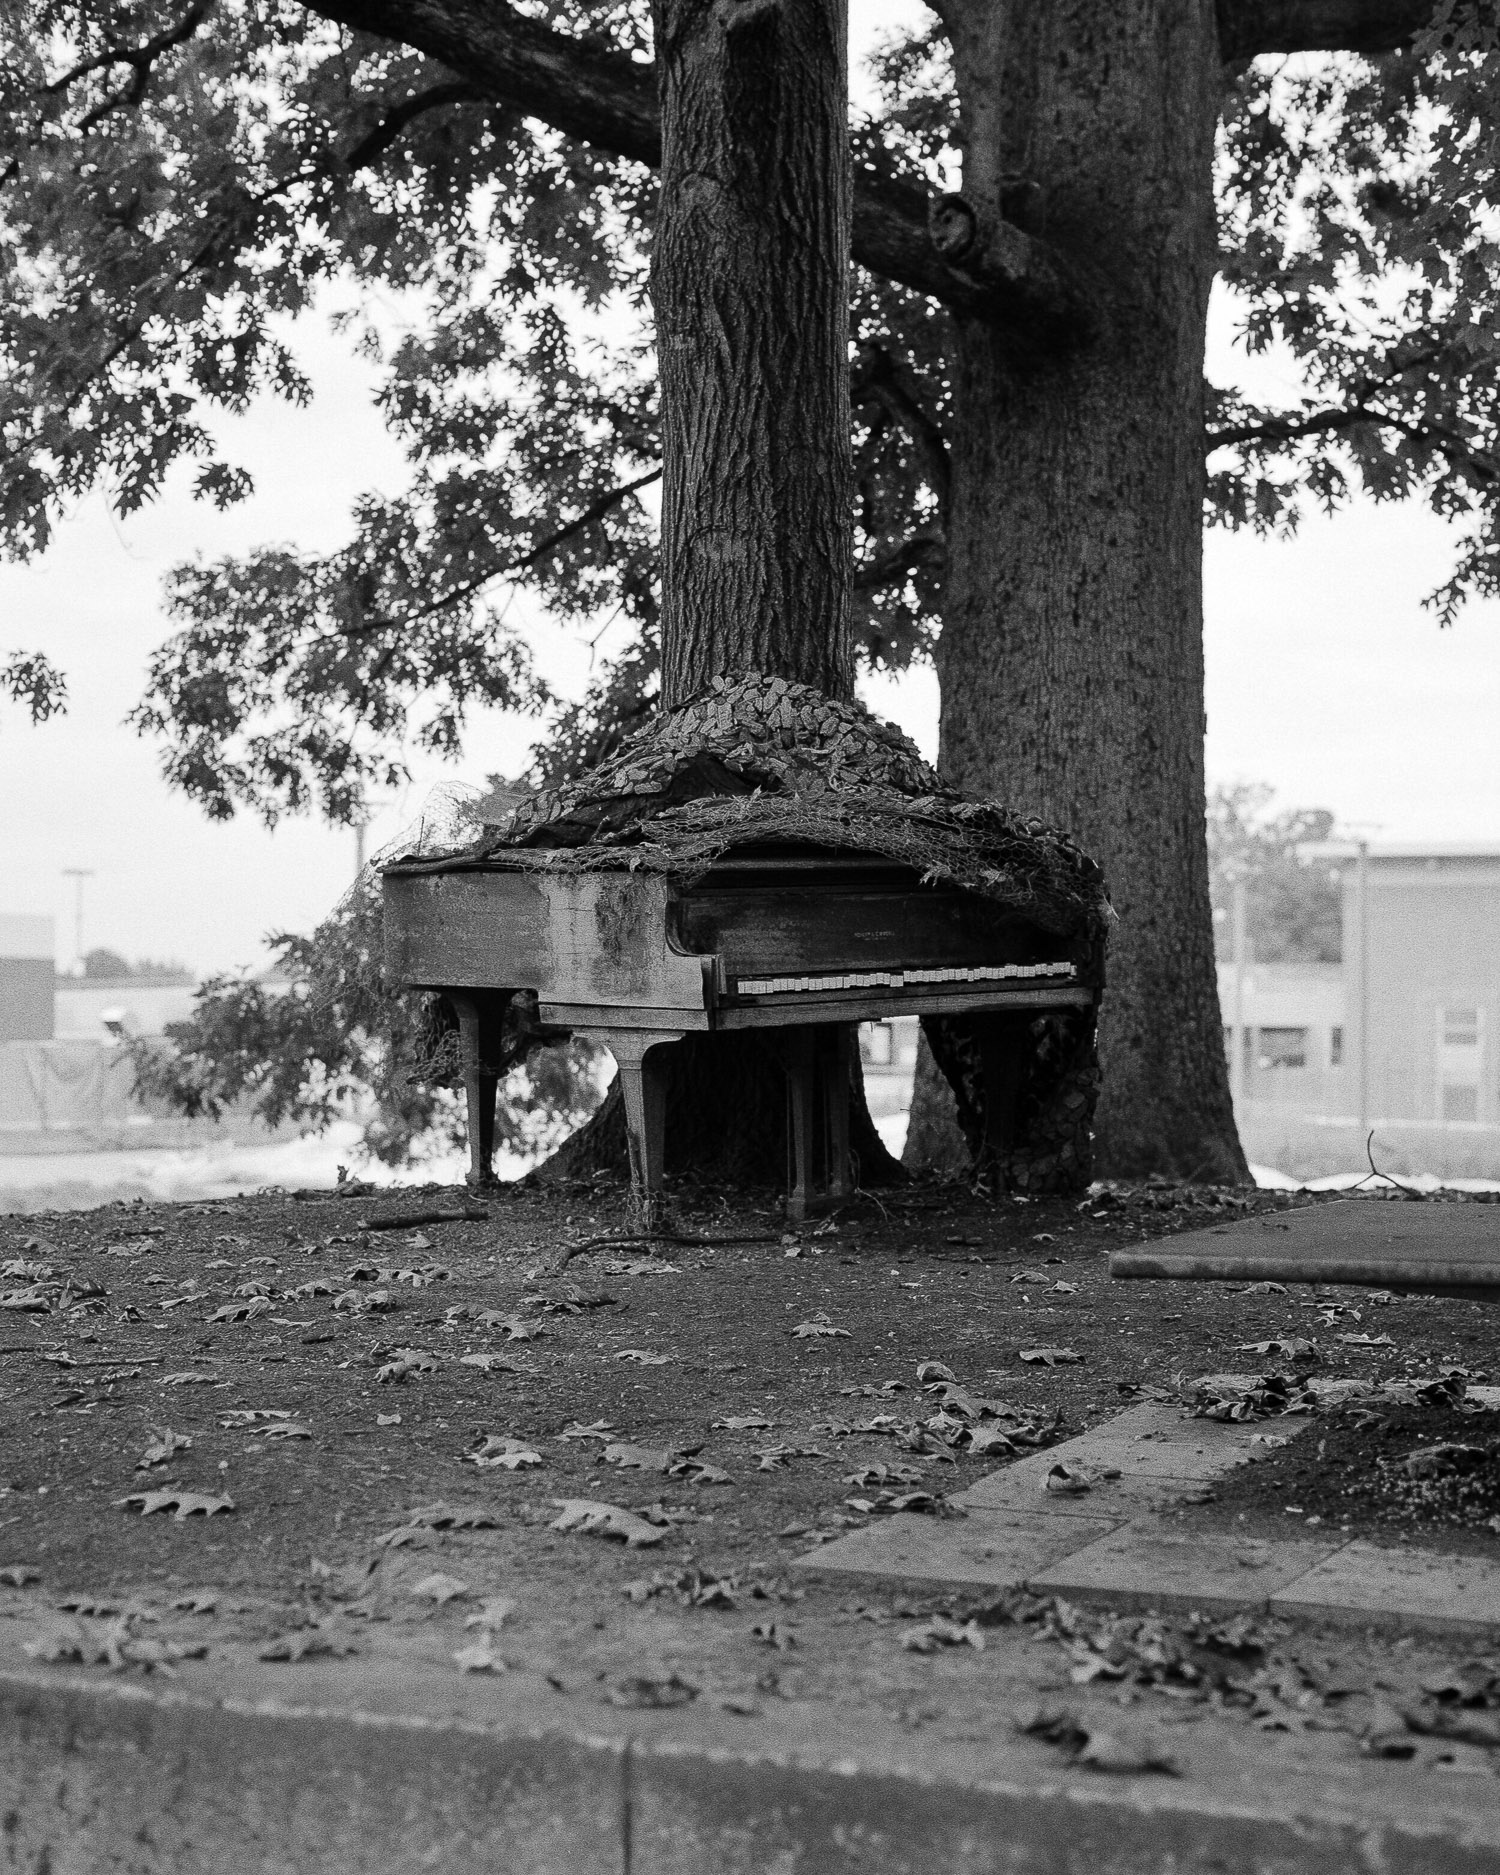 A piano in disrepair outside and under a tree